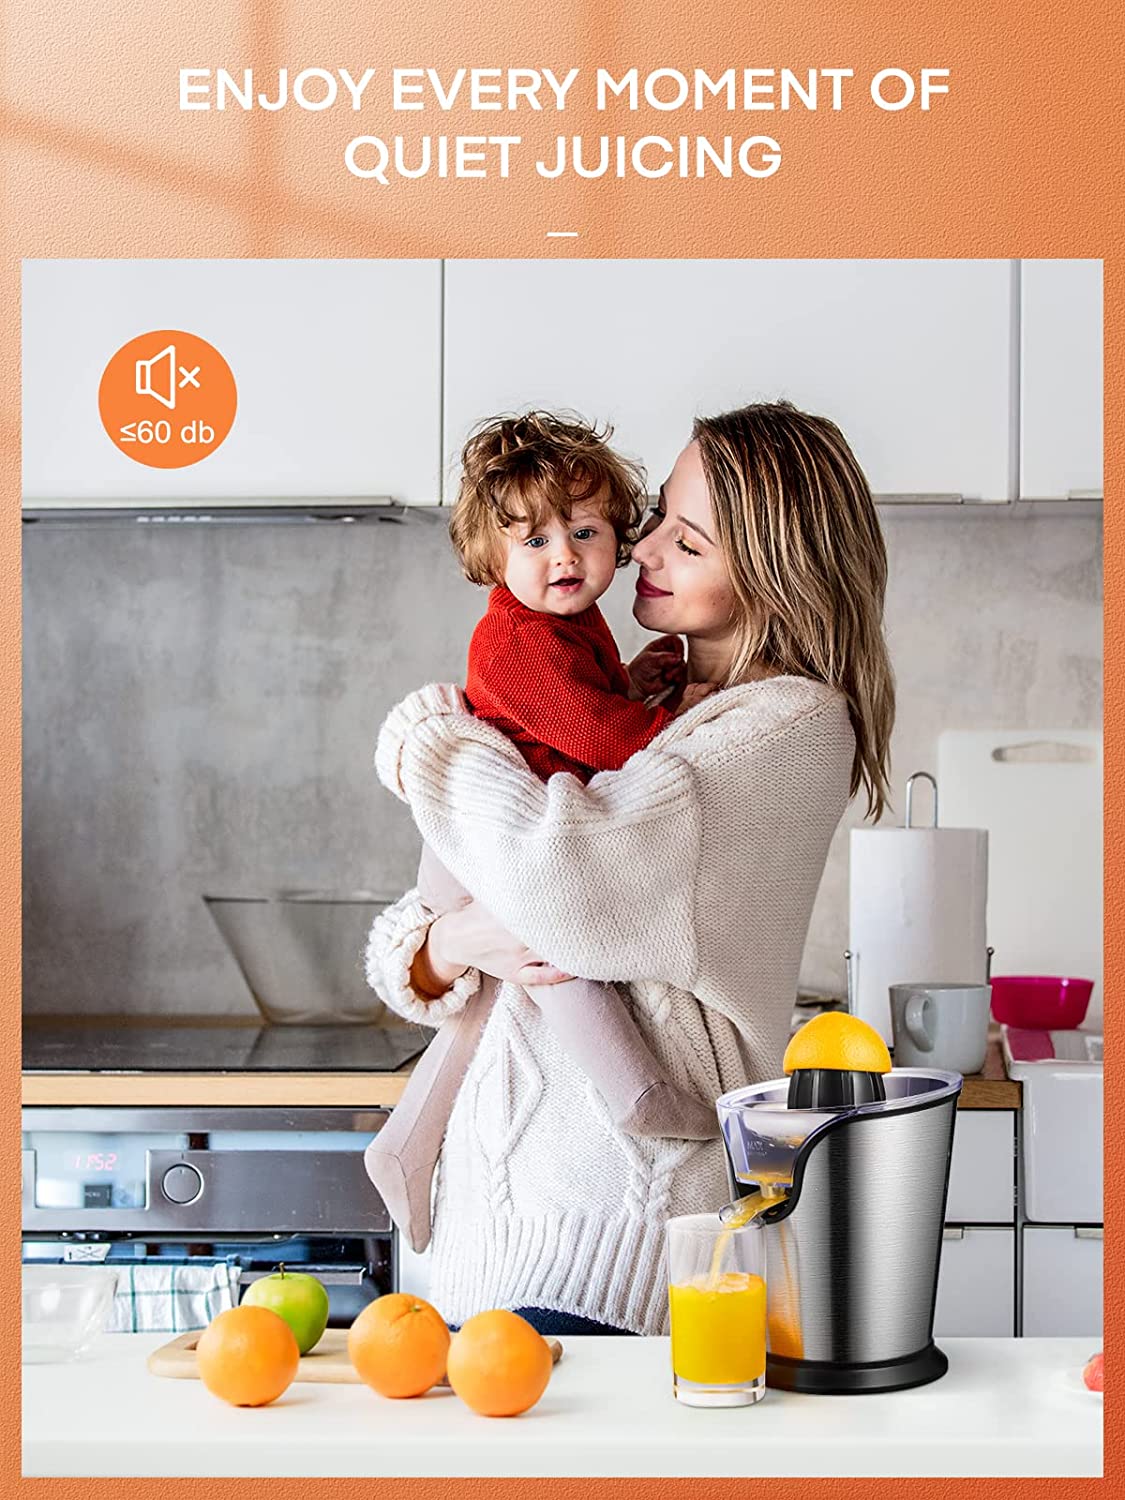 enjoy every moment of quiet juicing, FOHERE Orange Juice Squeezer Electric Citrus Juicer with Two Interchangeable Cones Suitable for orange, lemon and Grapefruit, Brushed Stainless Steel